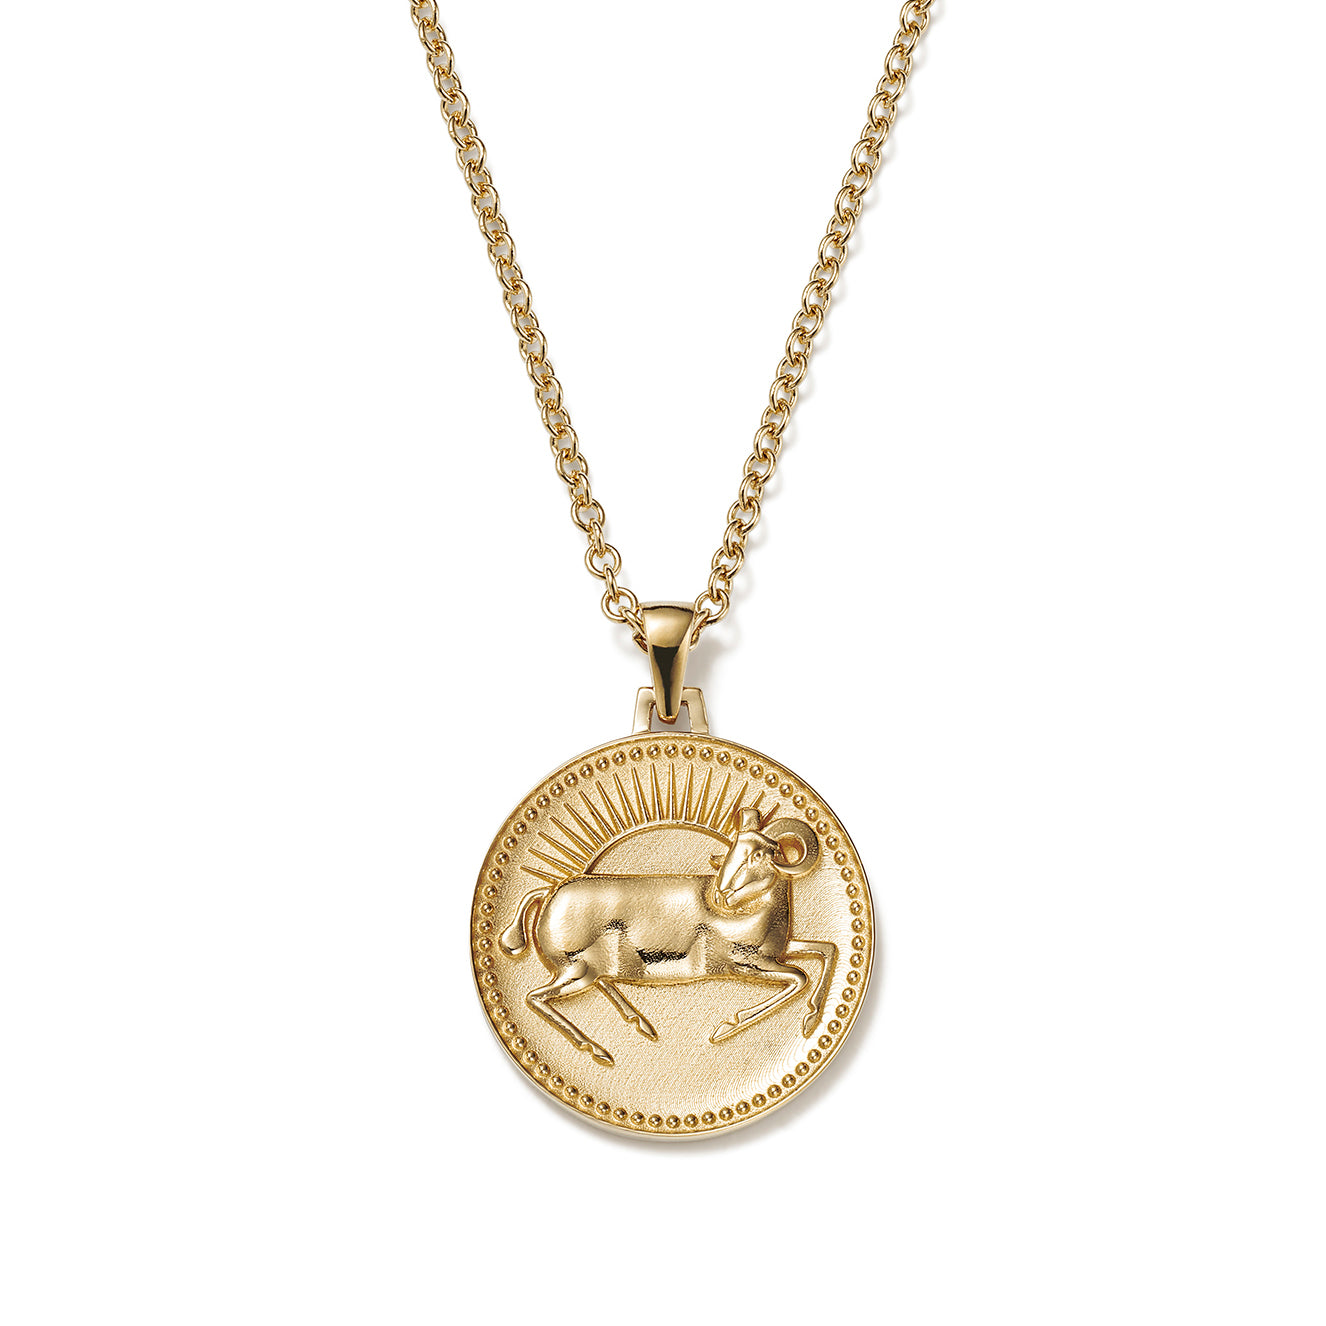 Aries Ethical Gold Zodiac Coin Pendant Necklace by FUTURA